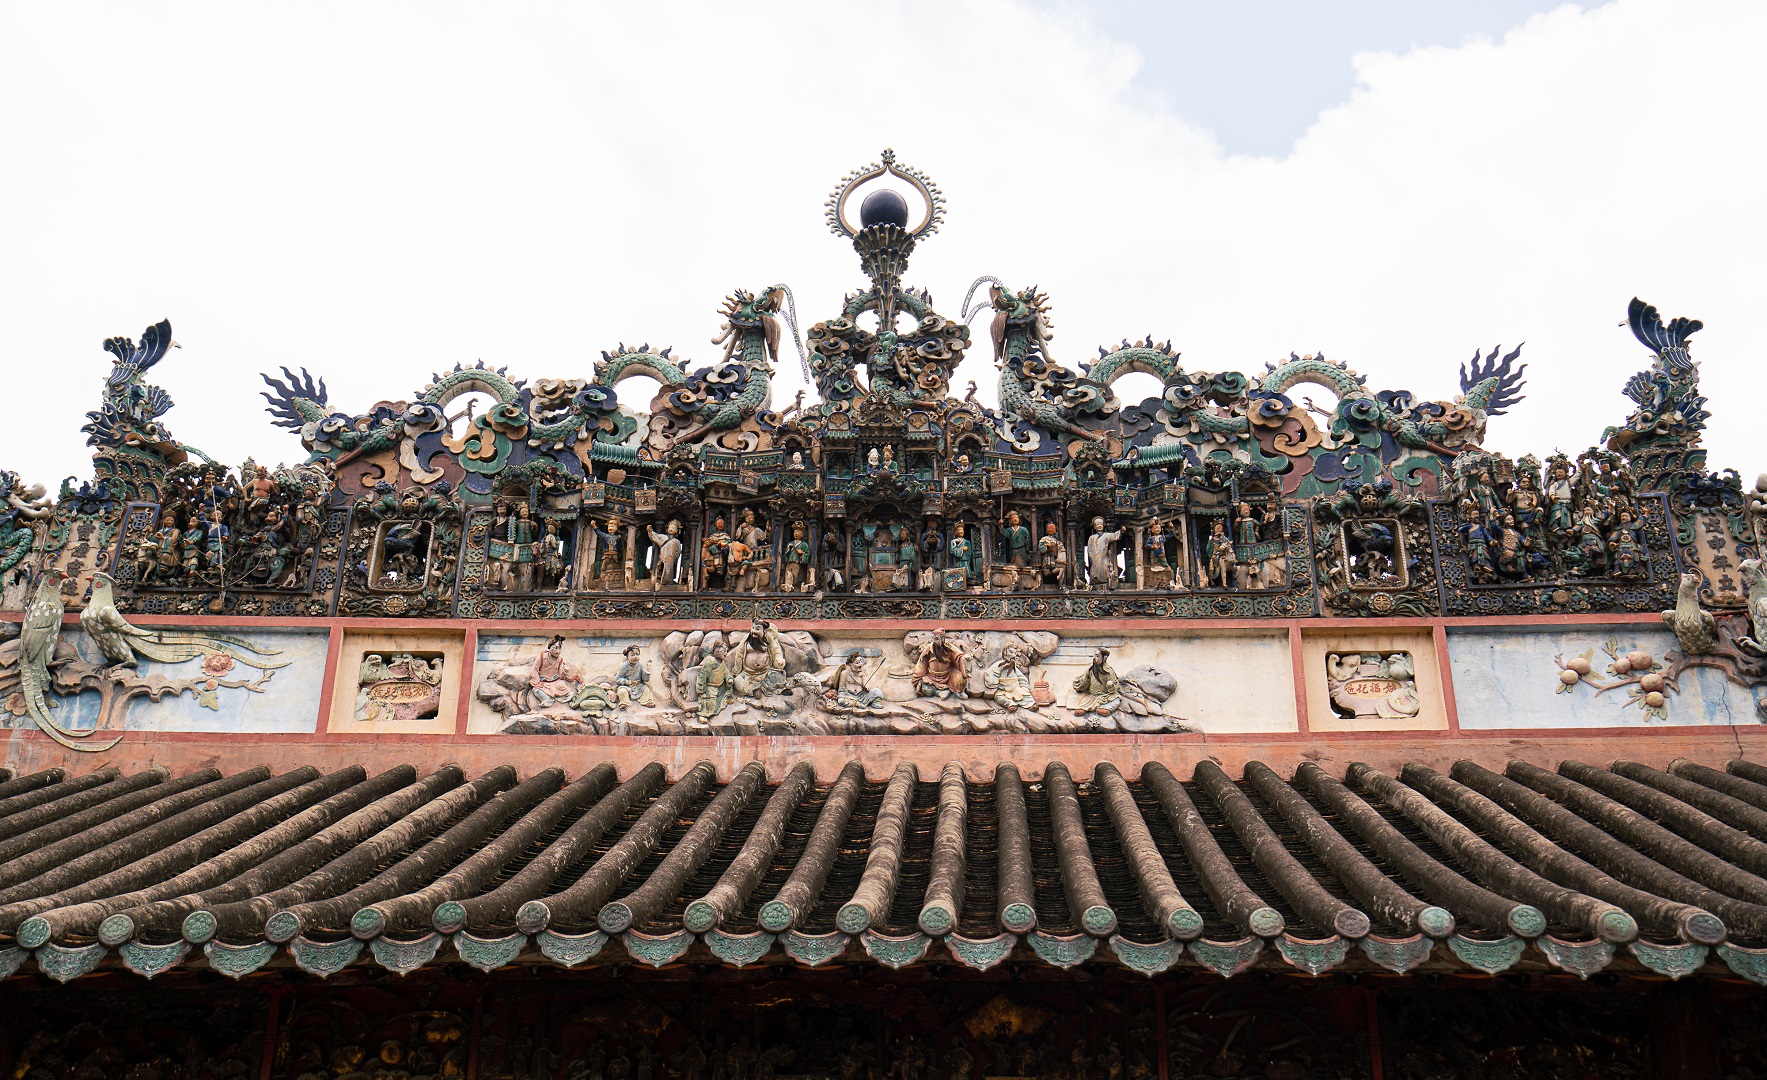 The roofline of the temple was designed in a meticulous and sophisticated manner. Photo: Nguyen Trung Au / Tuoi Tre News